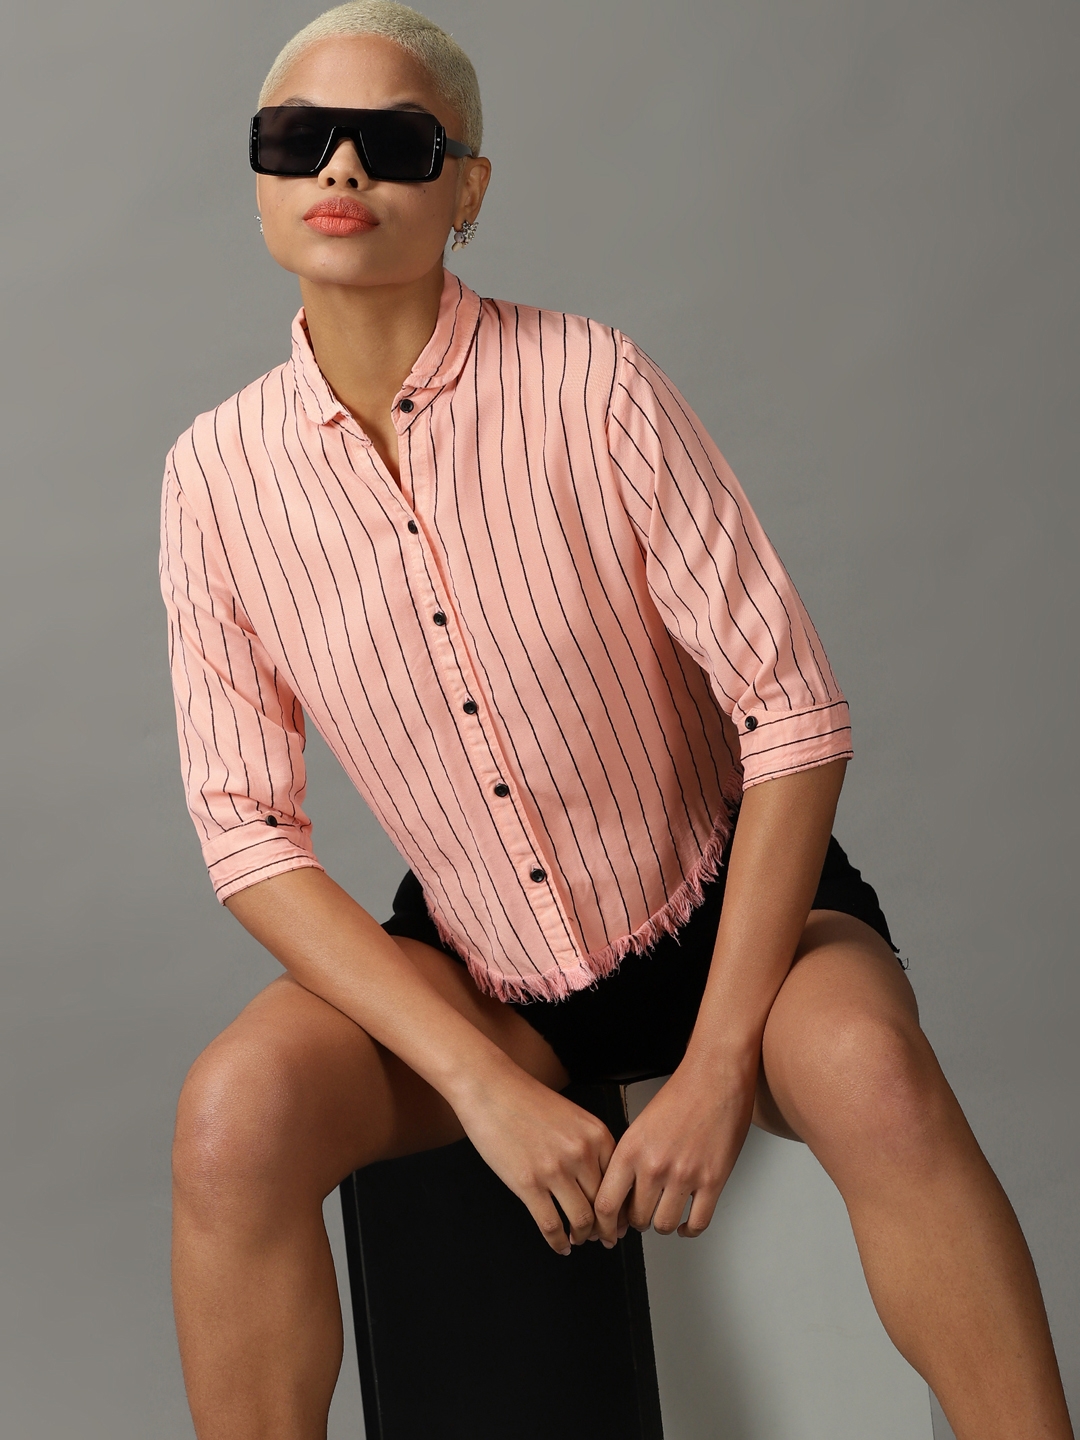 Women's Pink Polyester Striped Casual Shirts